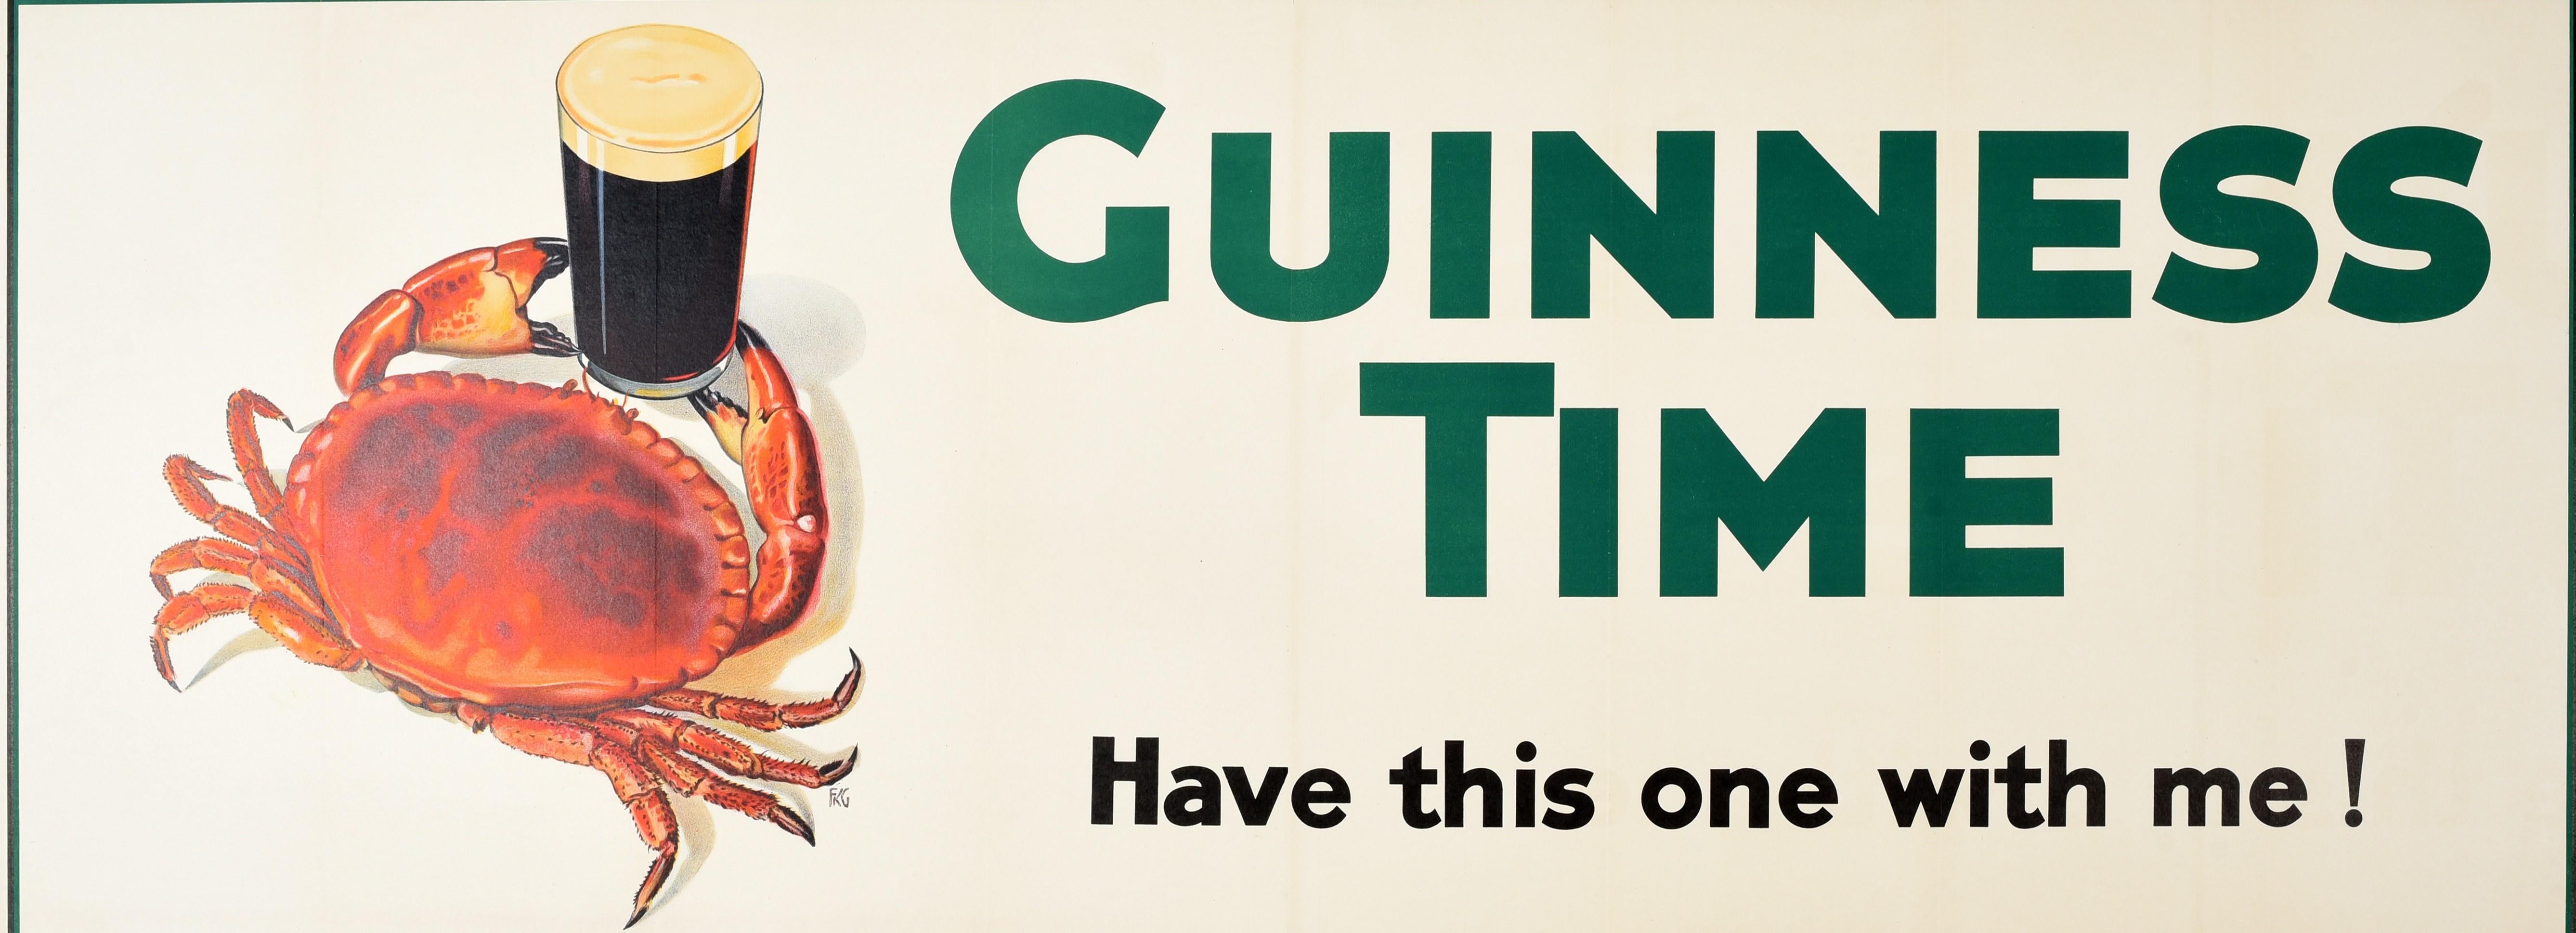 Original vintage drink poster - Guinness Time Have this one with me! Great design depicting a crab holding a pint of Guinness with the bold green and black lettering on the side. One of the world's most popular beer drink brands, Guinness is an